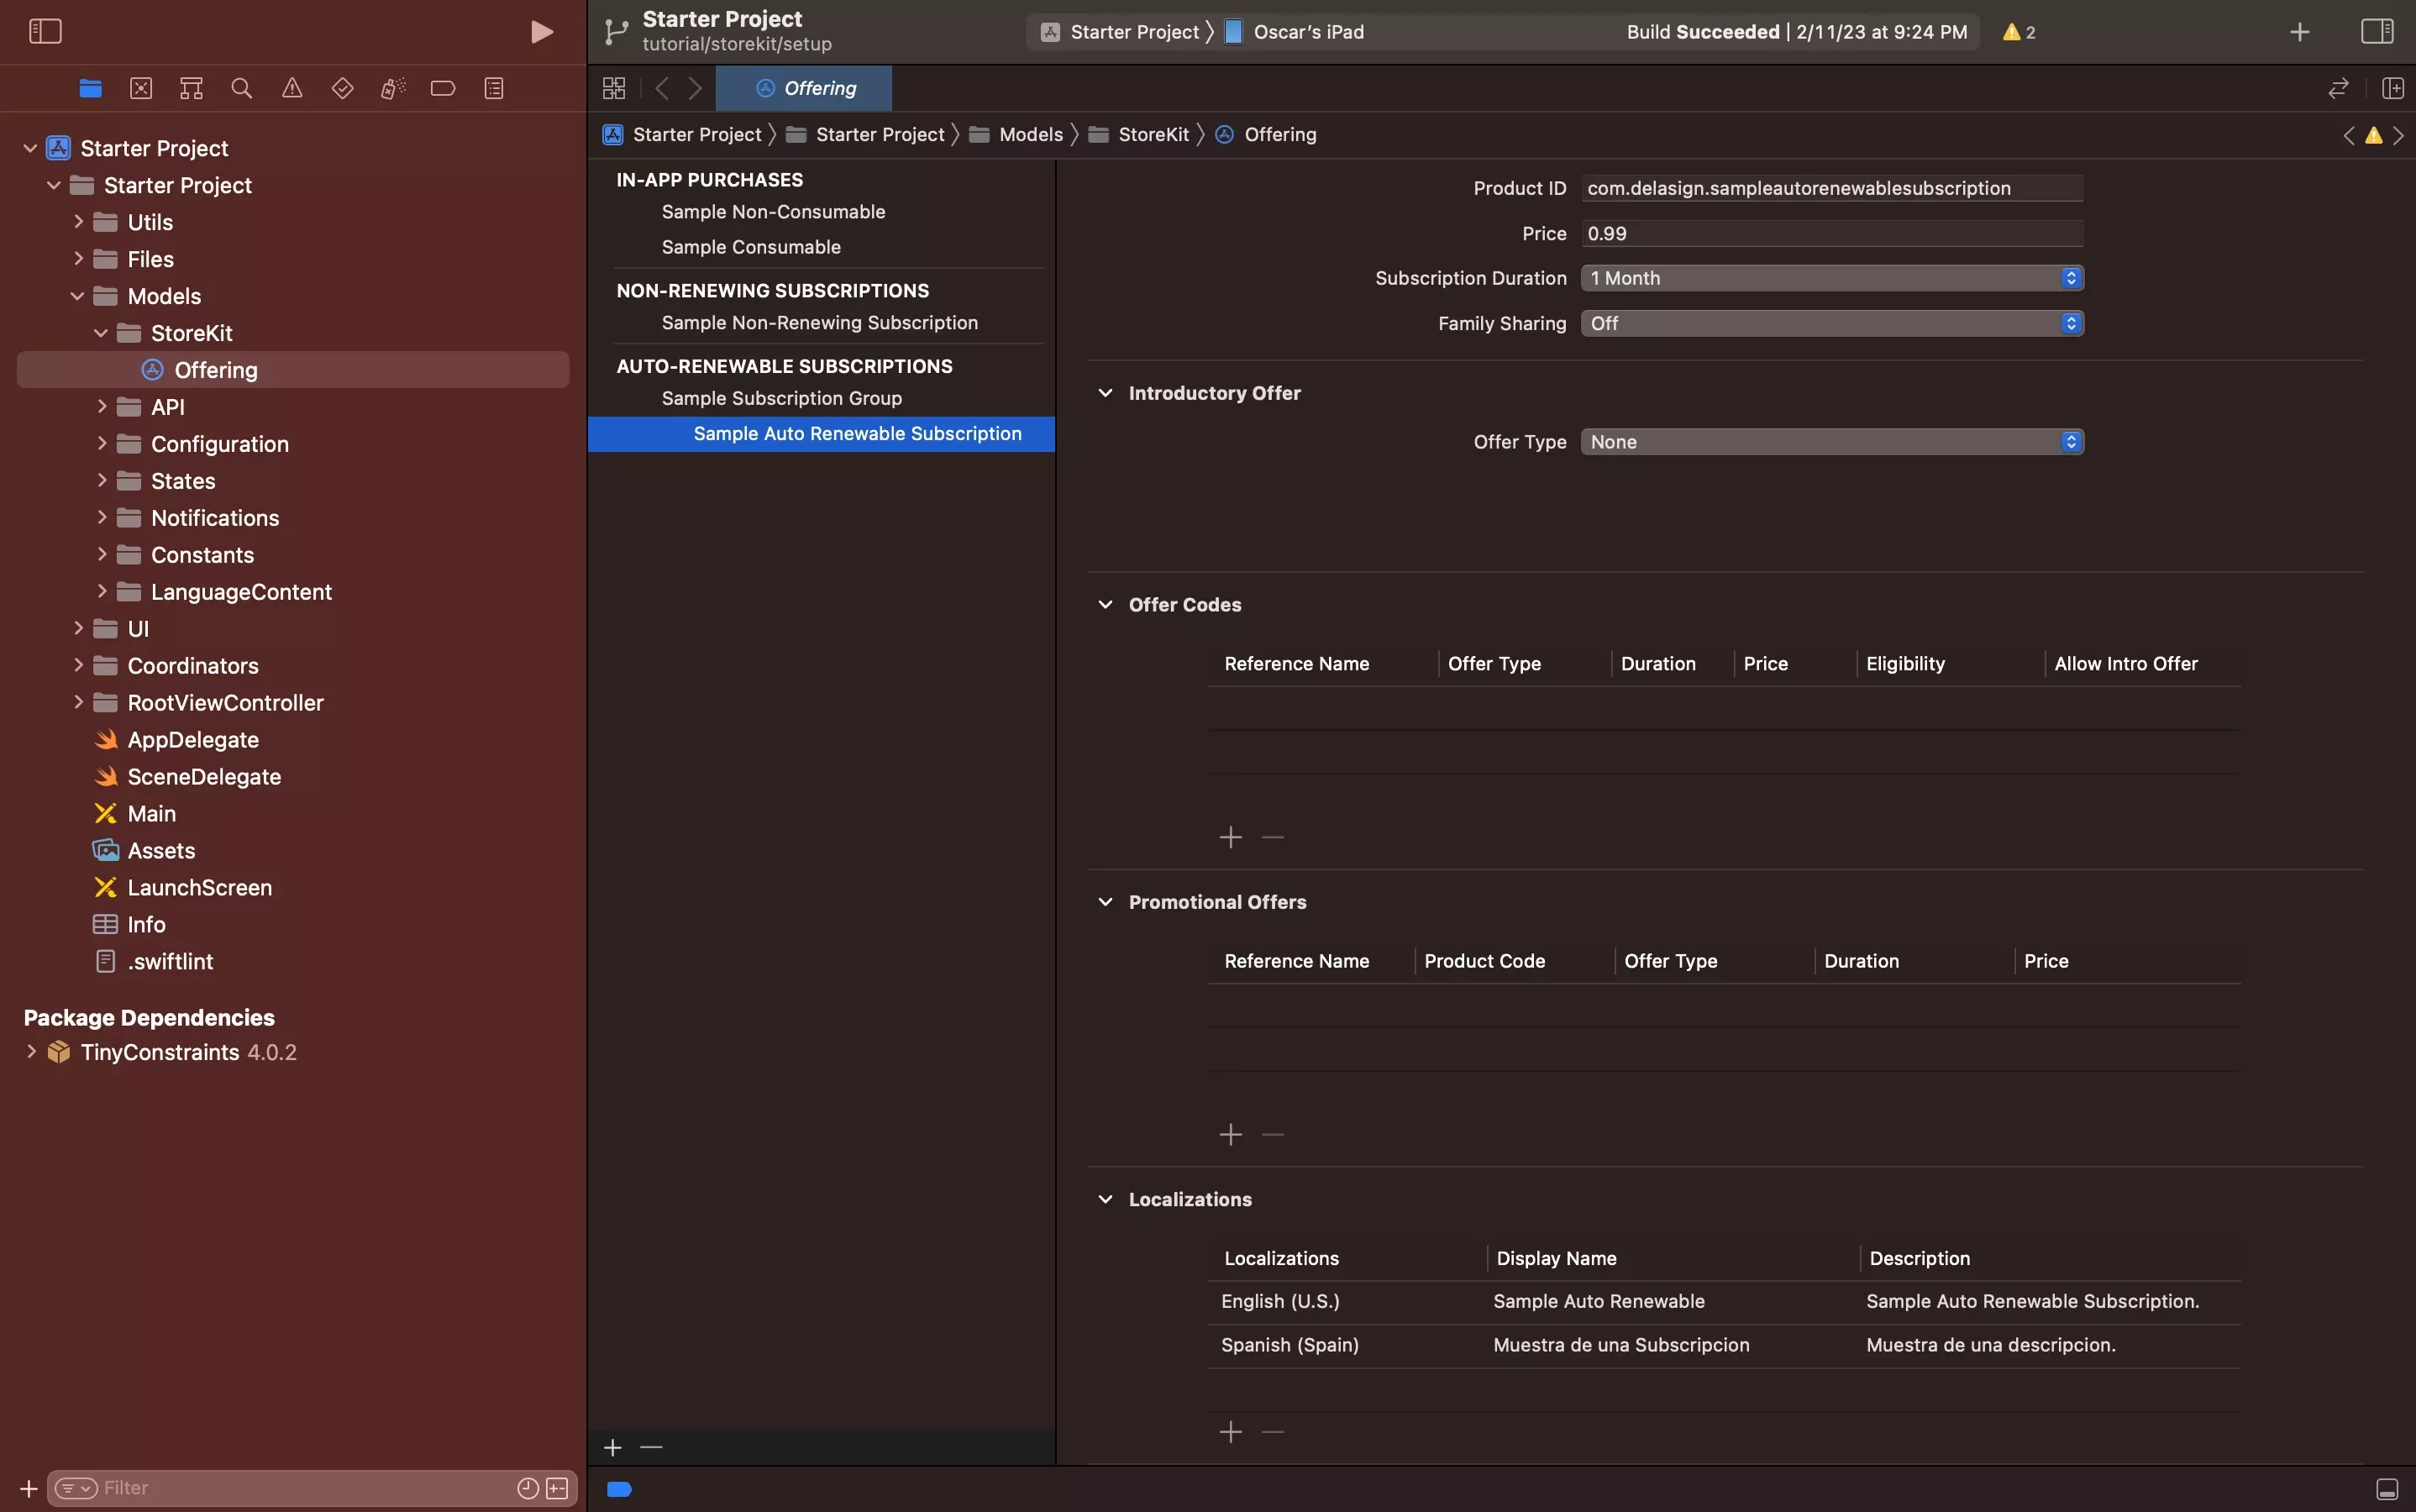 A screenshot of Xcode showing a local Auto-Renewable Subscription with Spanish and English localizations.